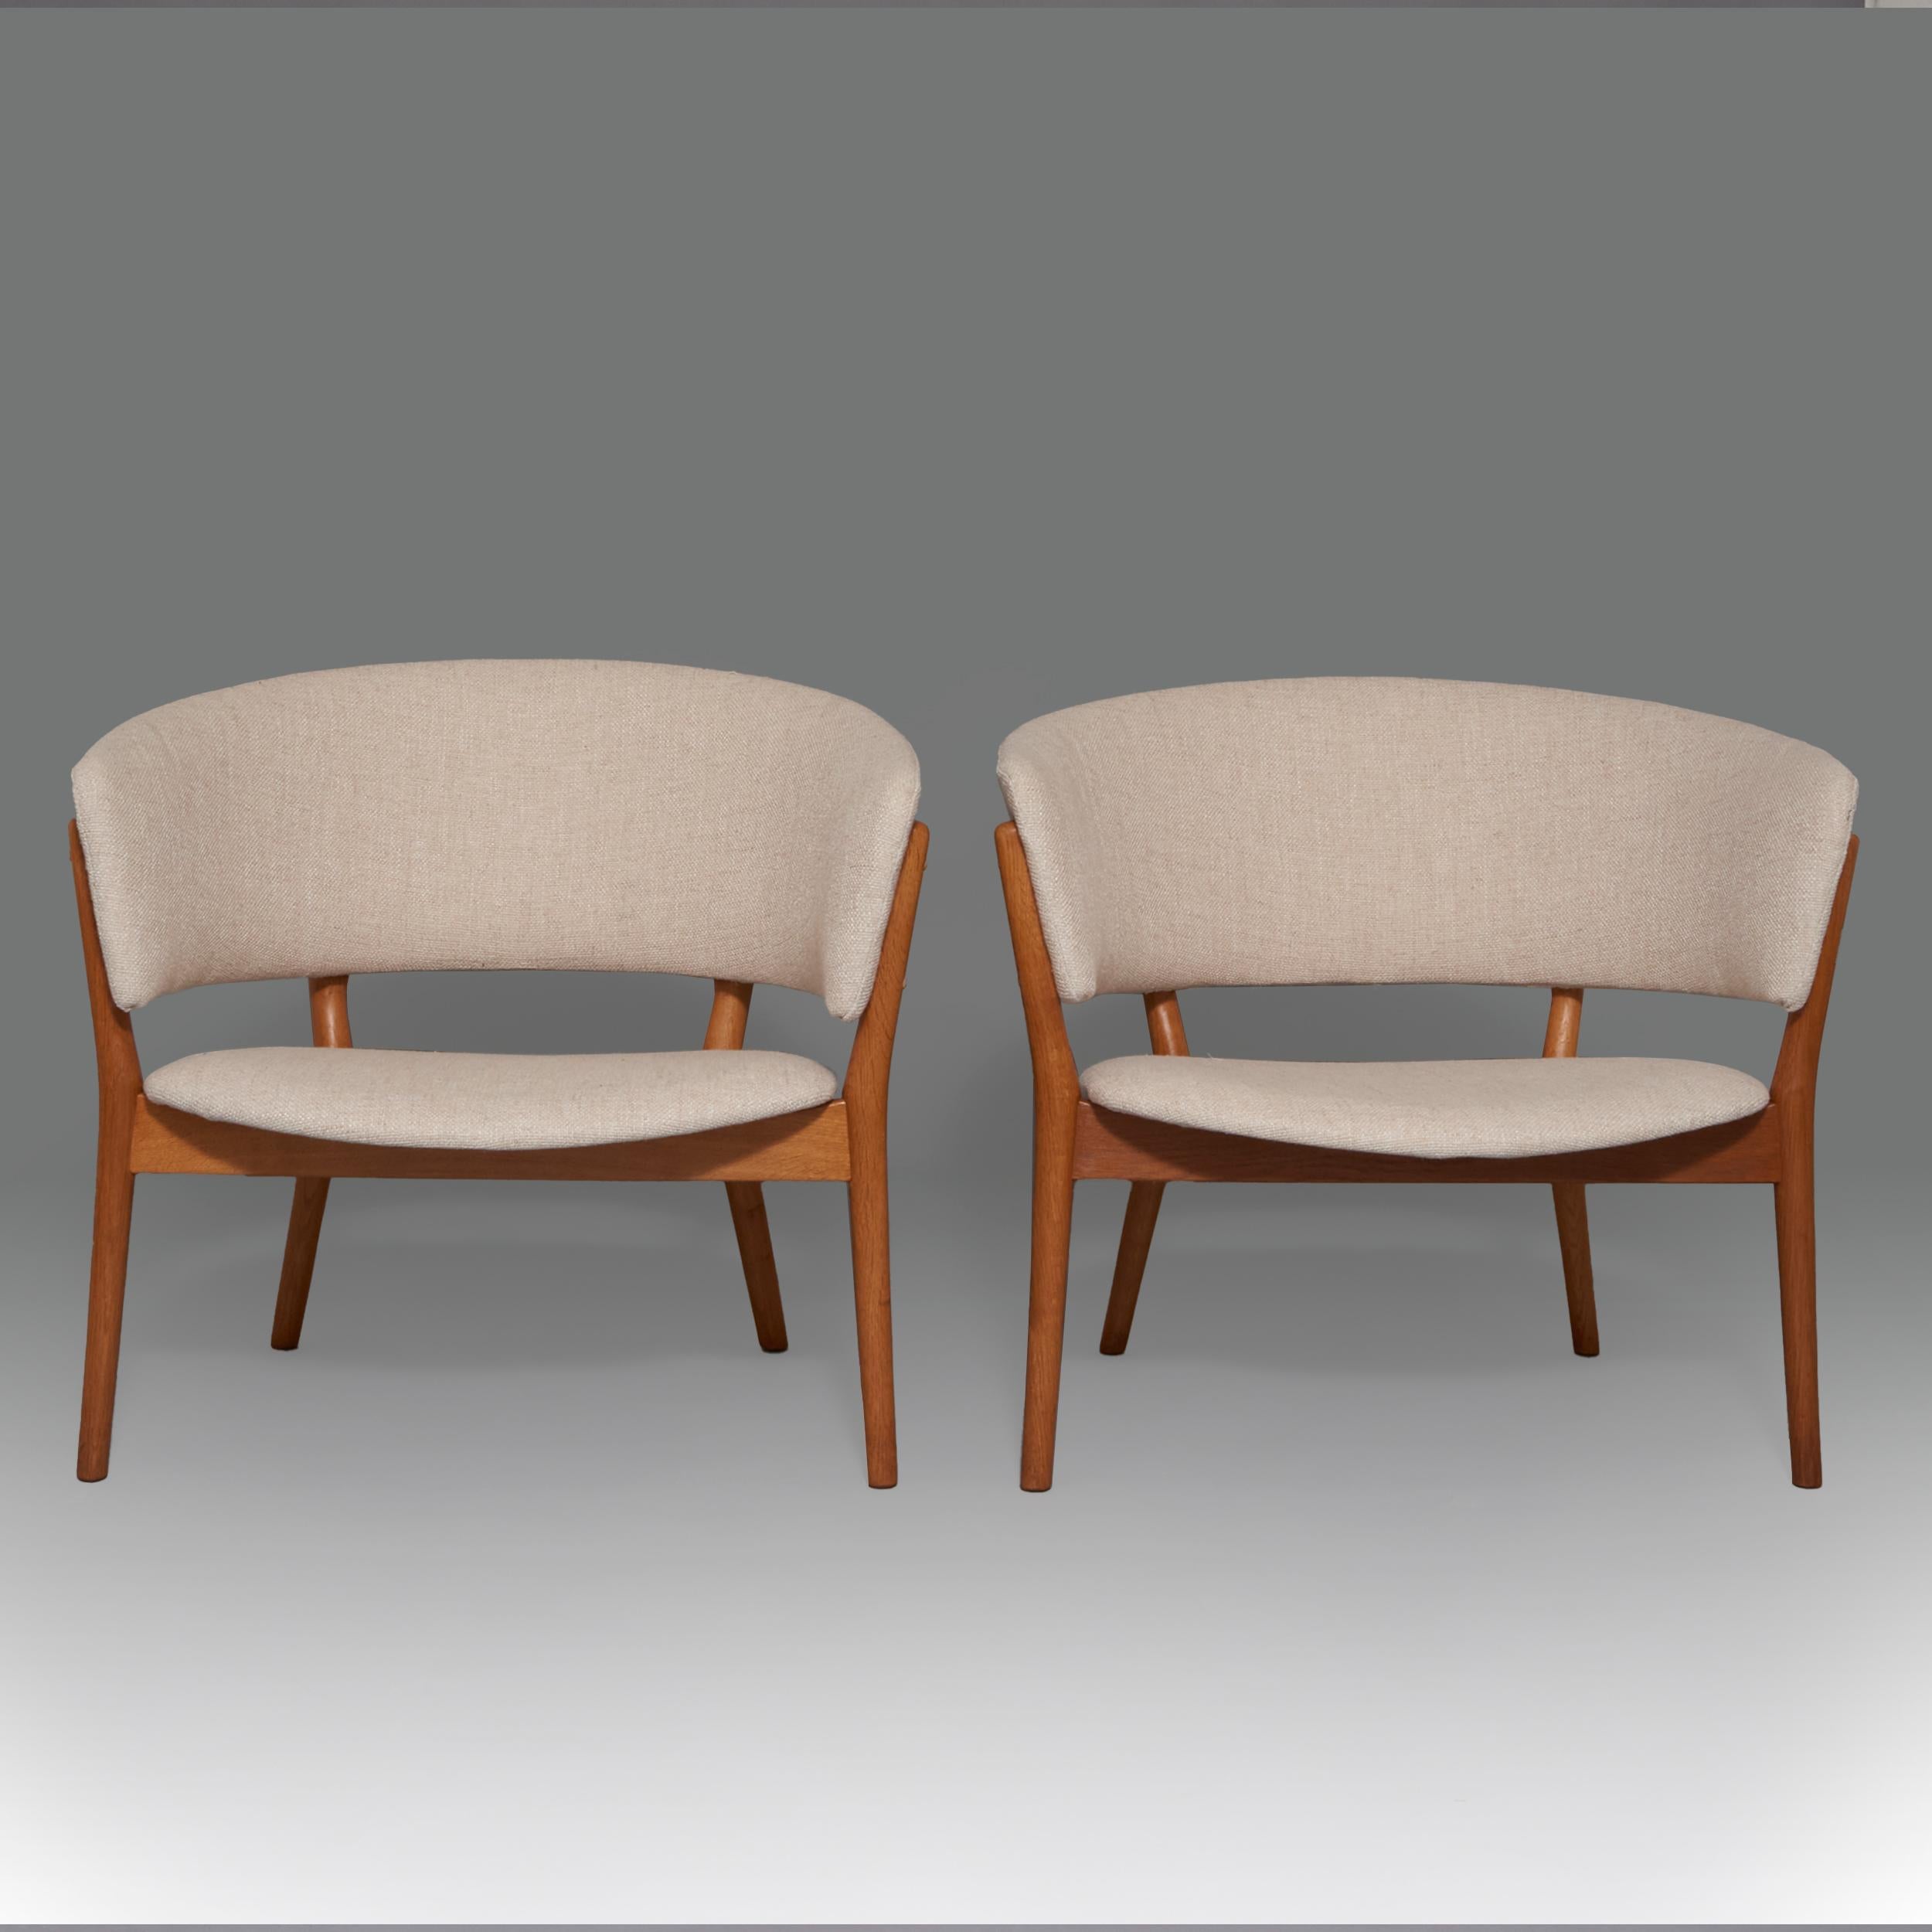 Pair of armchairs in Teak and upholstery designed by Nanna DItzel for Soren Willadsen Mobelfabrik. Denmark, 1950s Excellent Vintage condition, reupholstered

Nanna DItzel, graduated architect in London and as a cabinet maker in Denmark, she